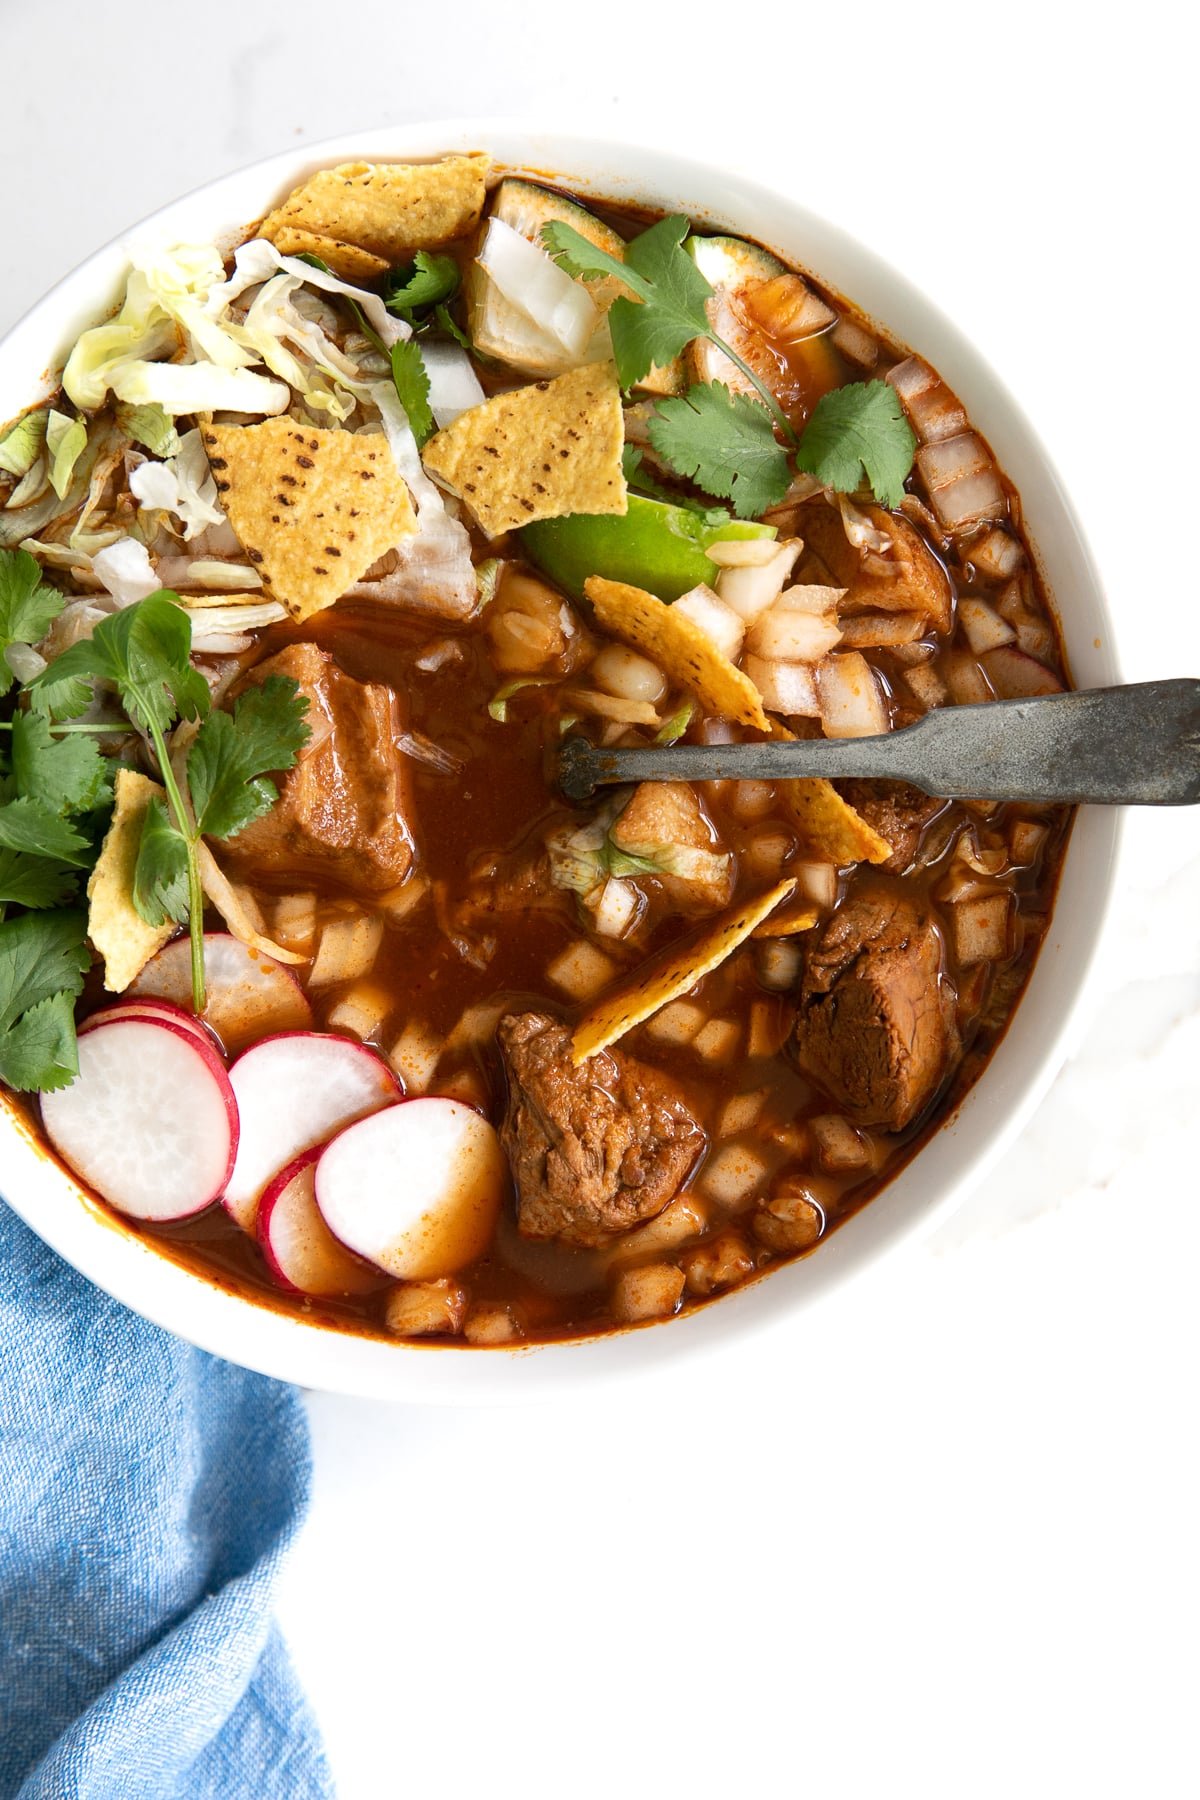 A bowl of posole garnished with shredded lettuce, sliced radish, cilantro, lime, and crushed corn tortillas.